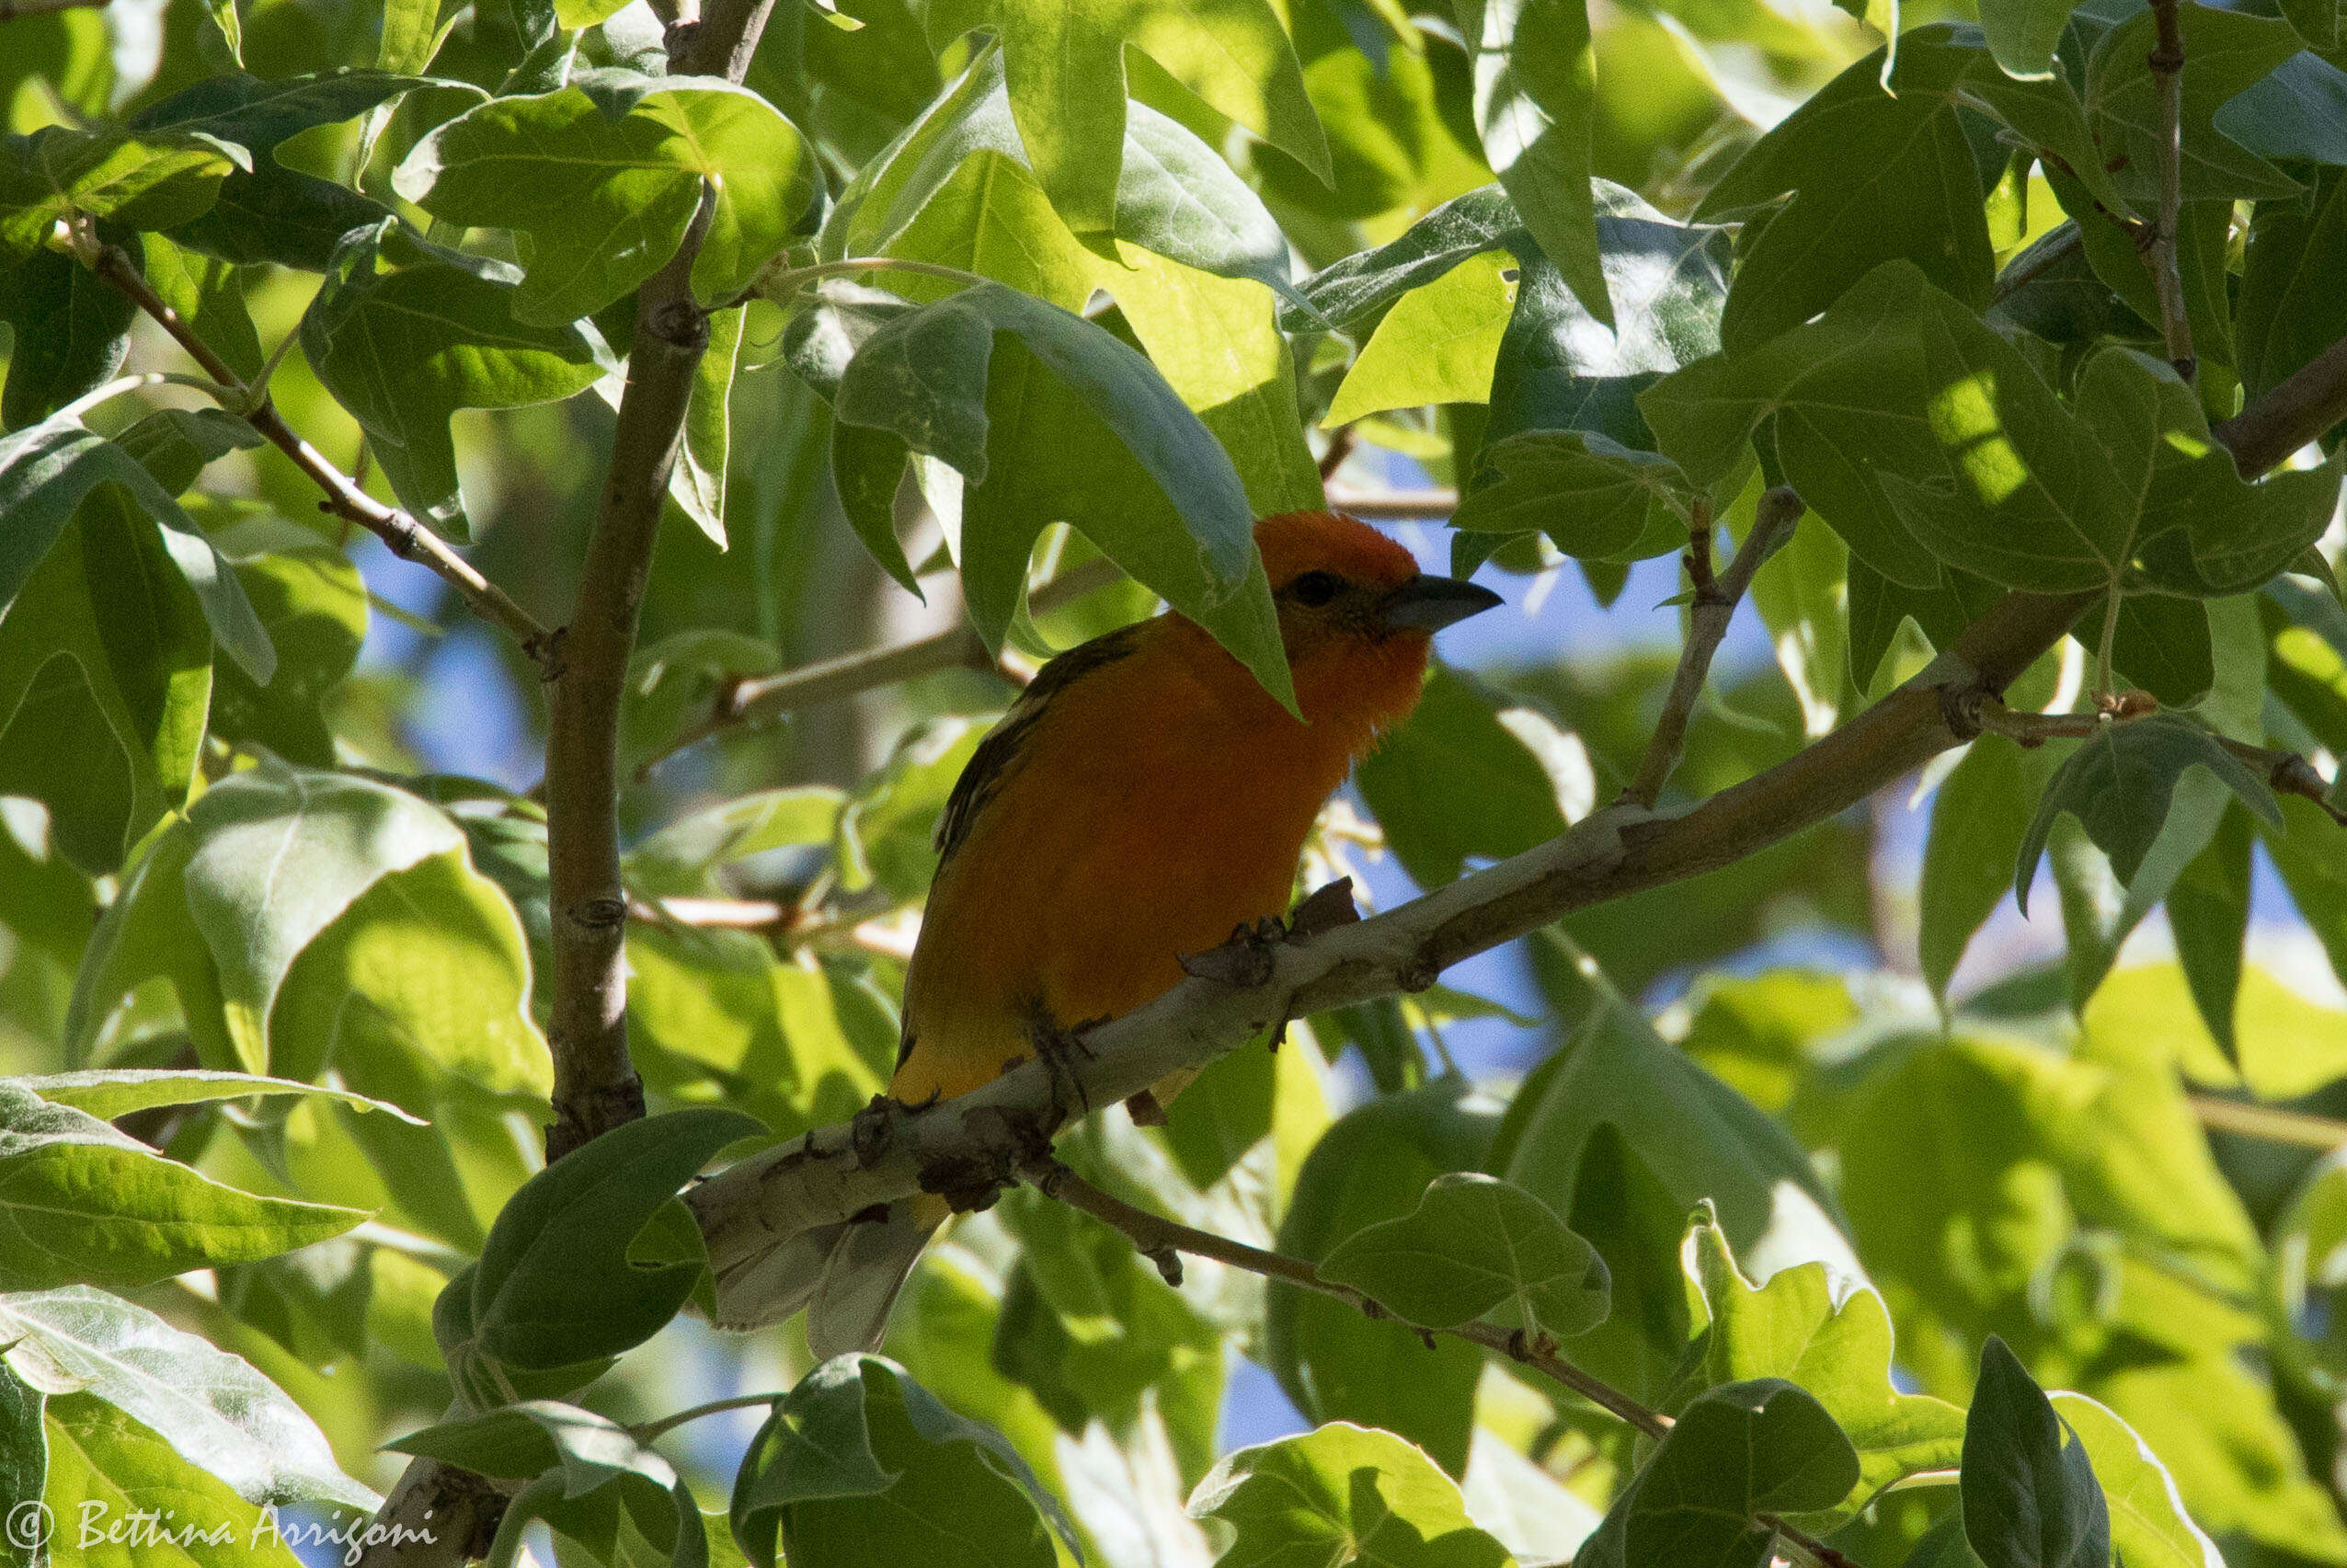 Image of Flame-colored Tanager